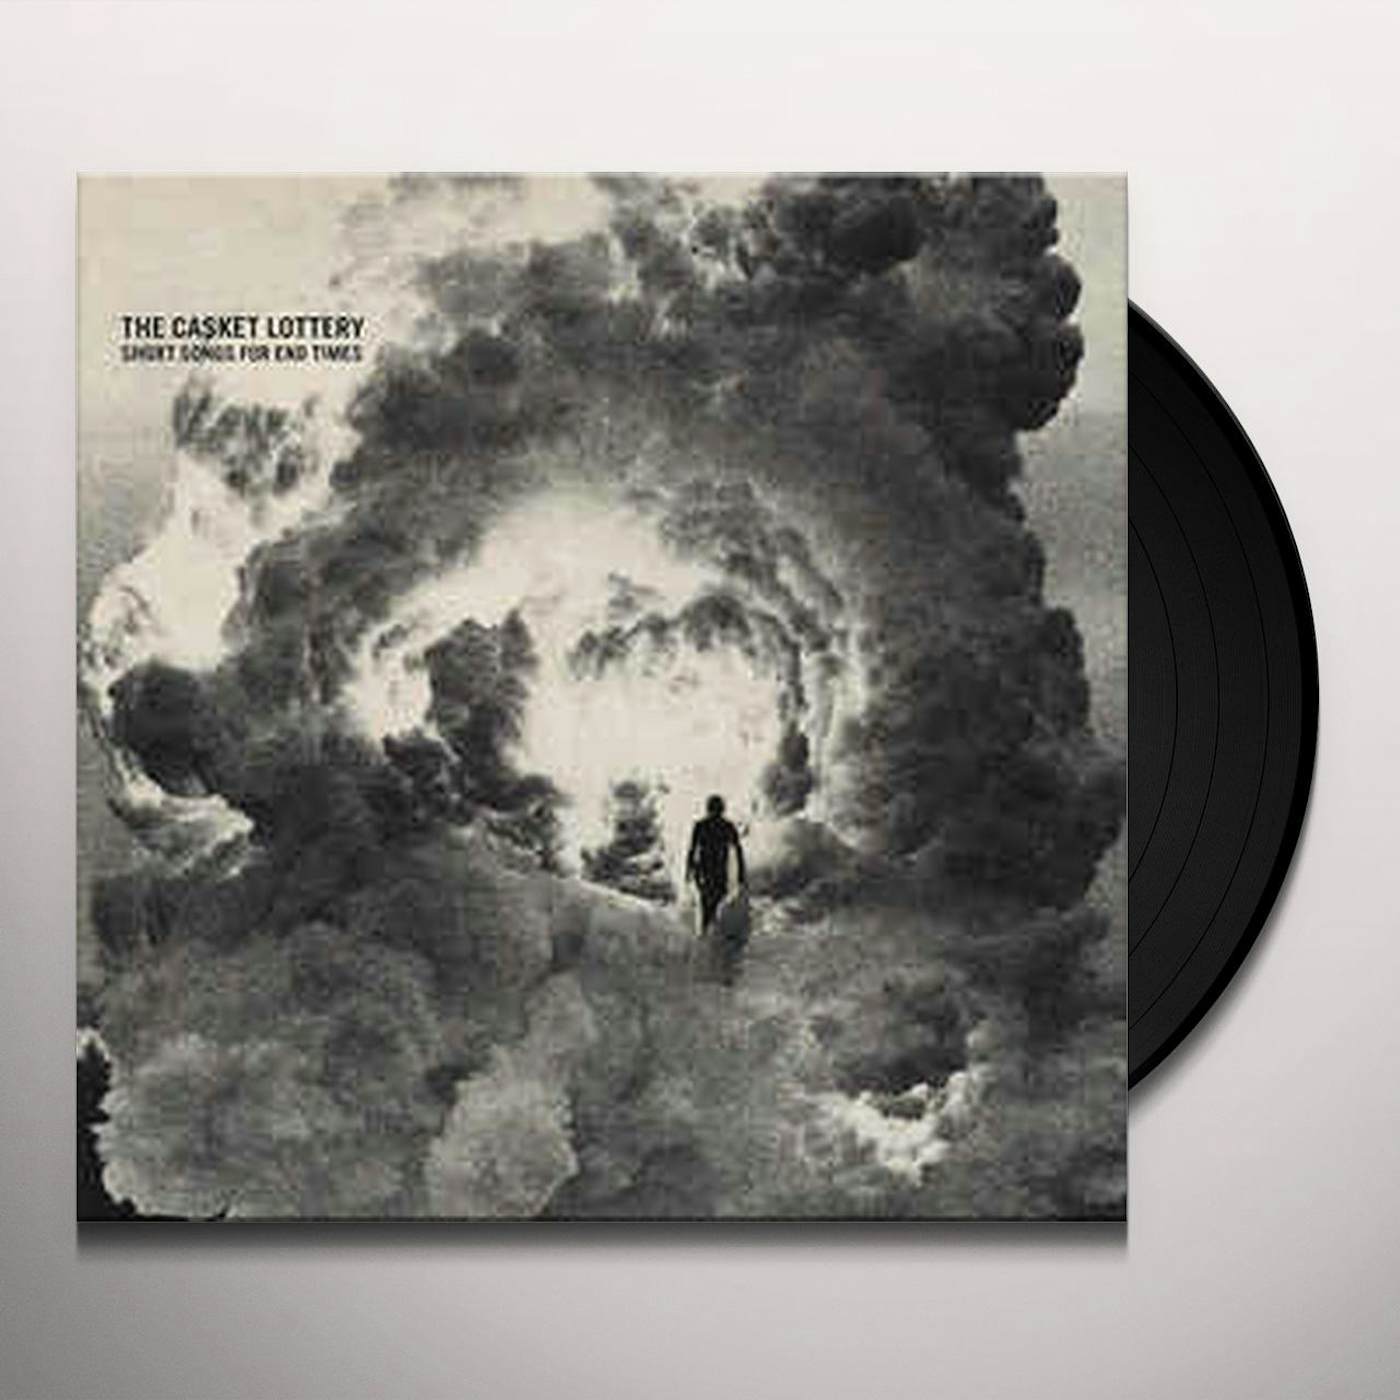 The Casket Lottery Short Songs for End Times Vinyl Record